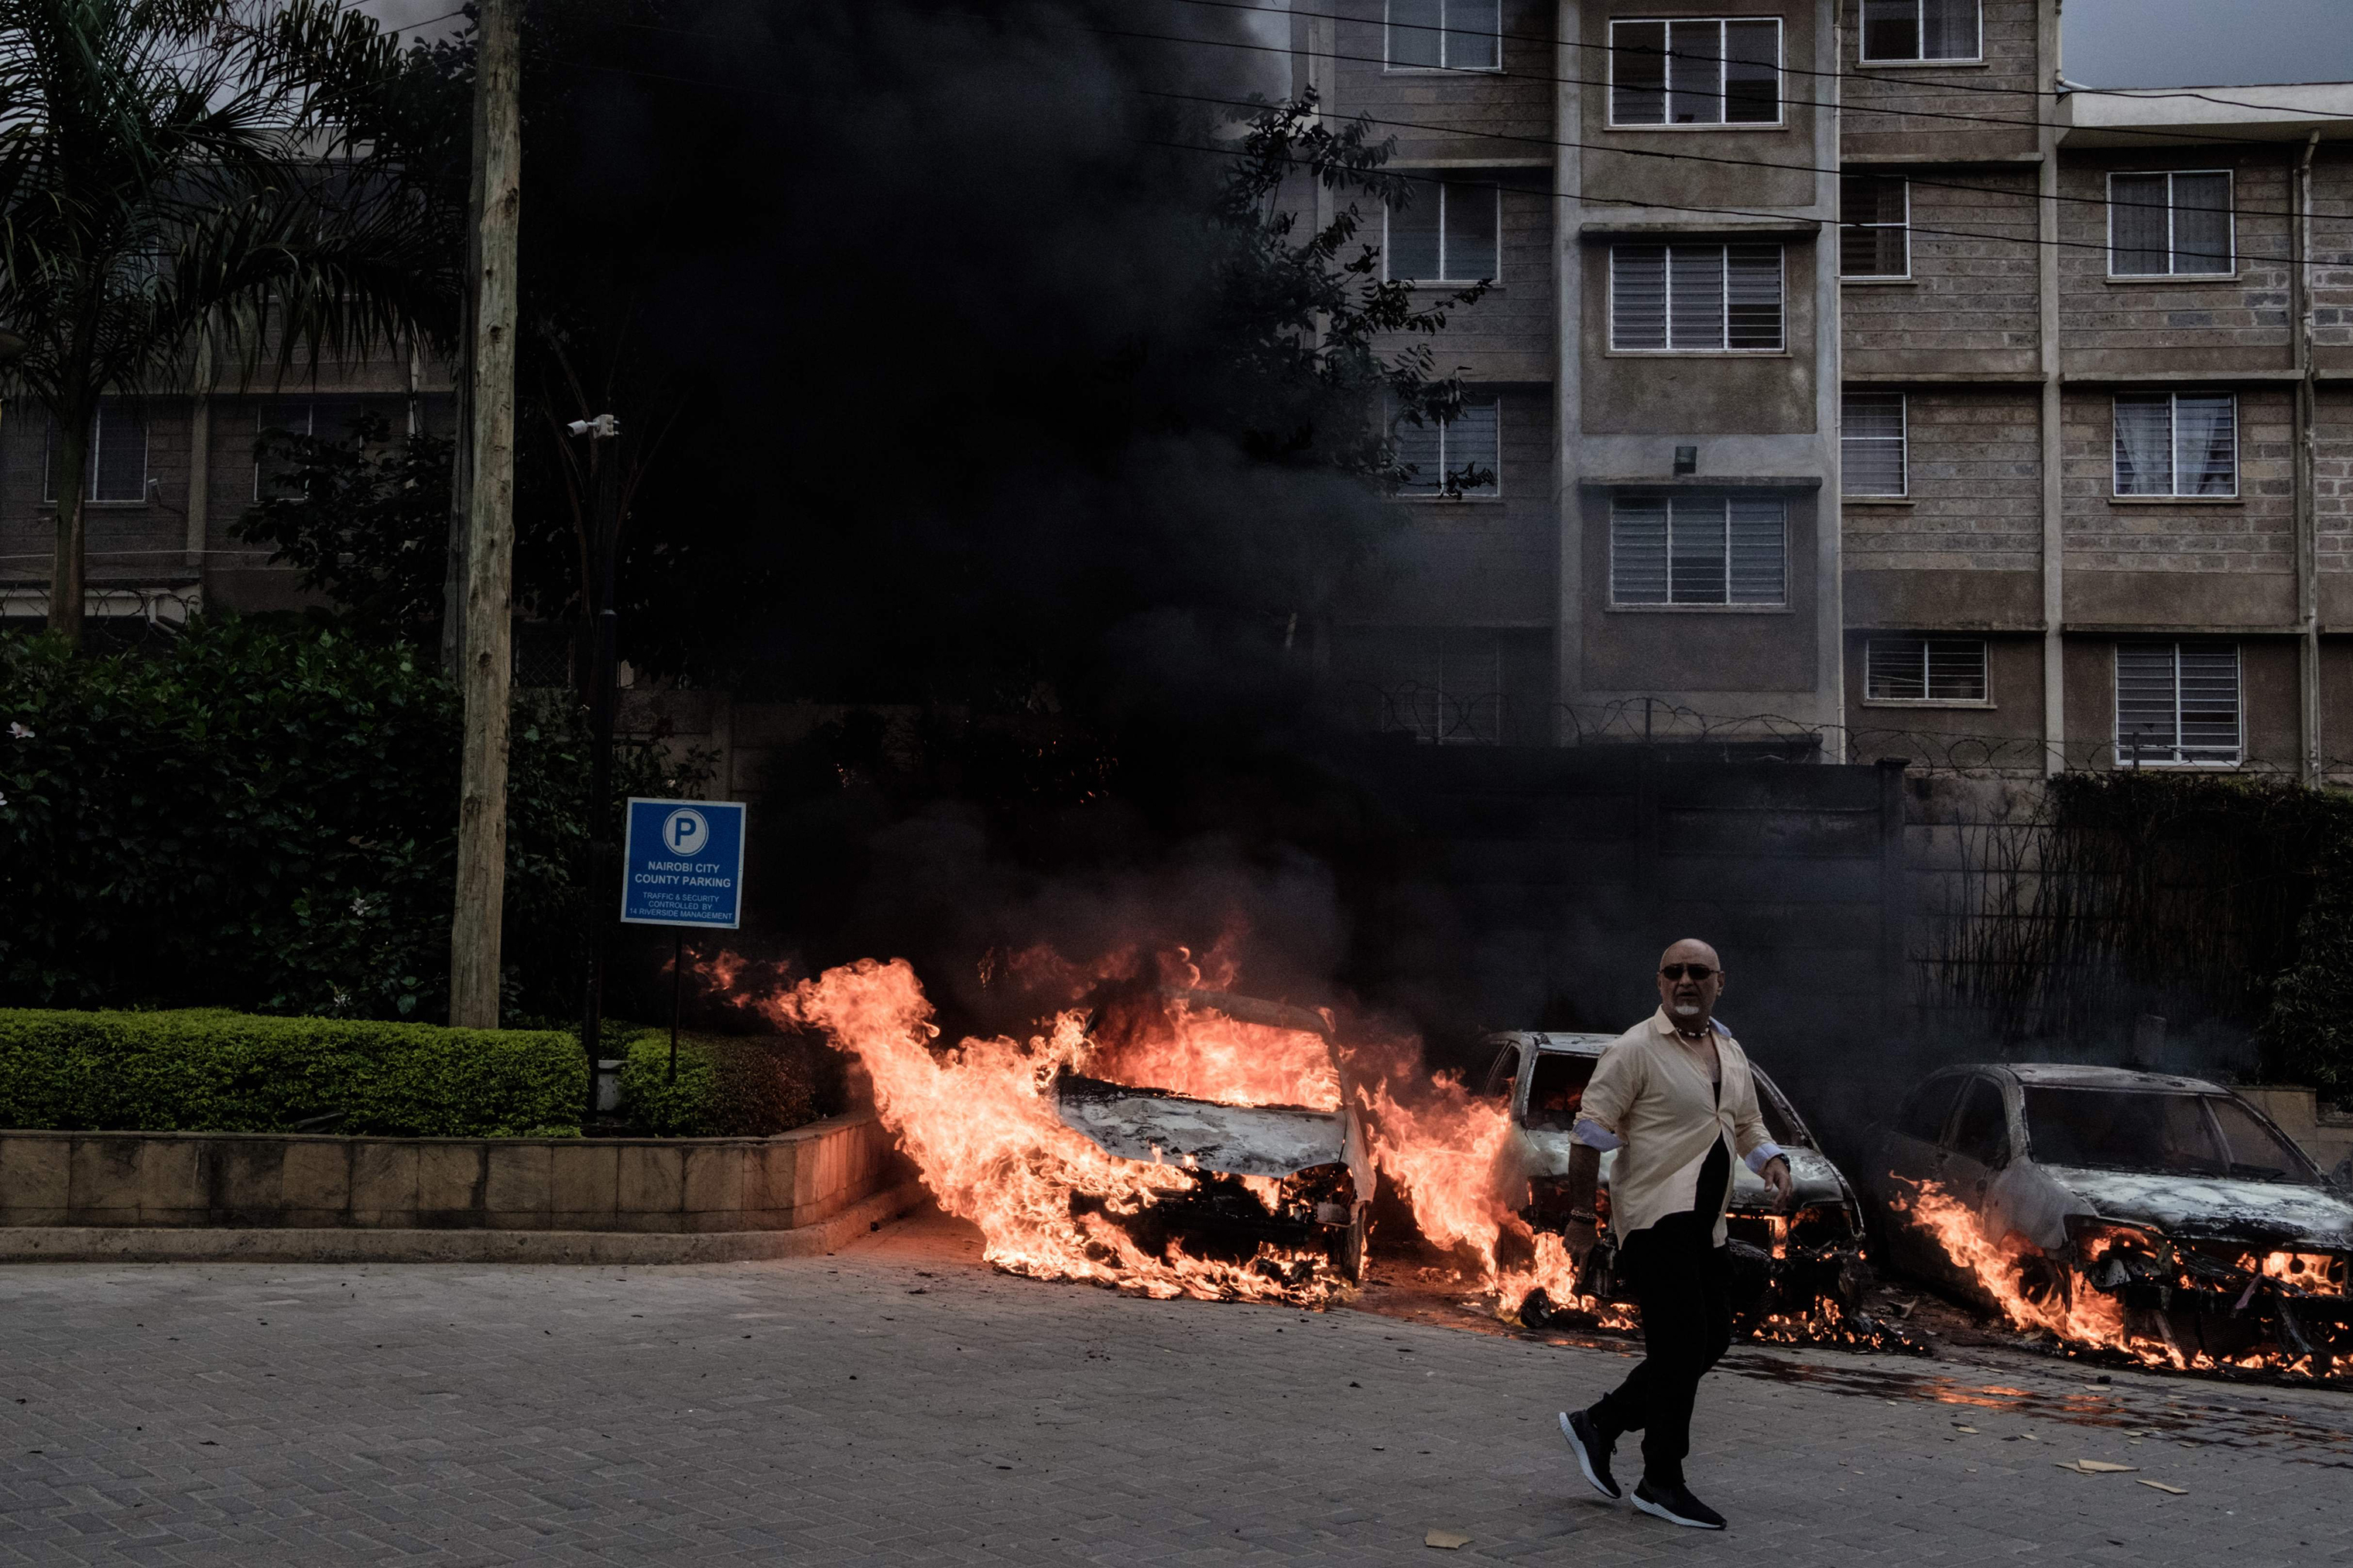 A man passes in front of burning cars that exploded at the entrance of dusitD2 hotel in Nairobi. (Kabir Dhanji—AFP/Getty Images)